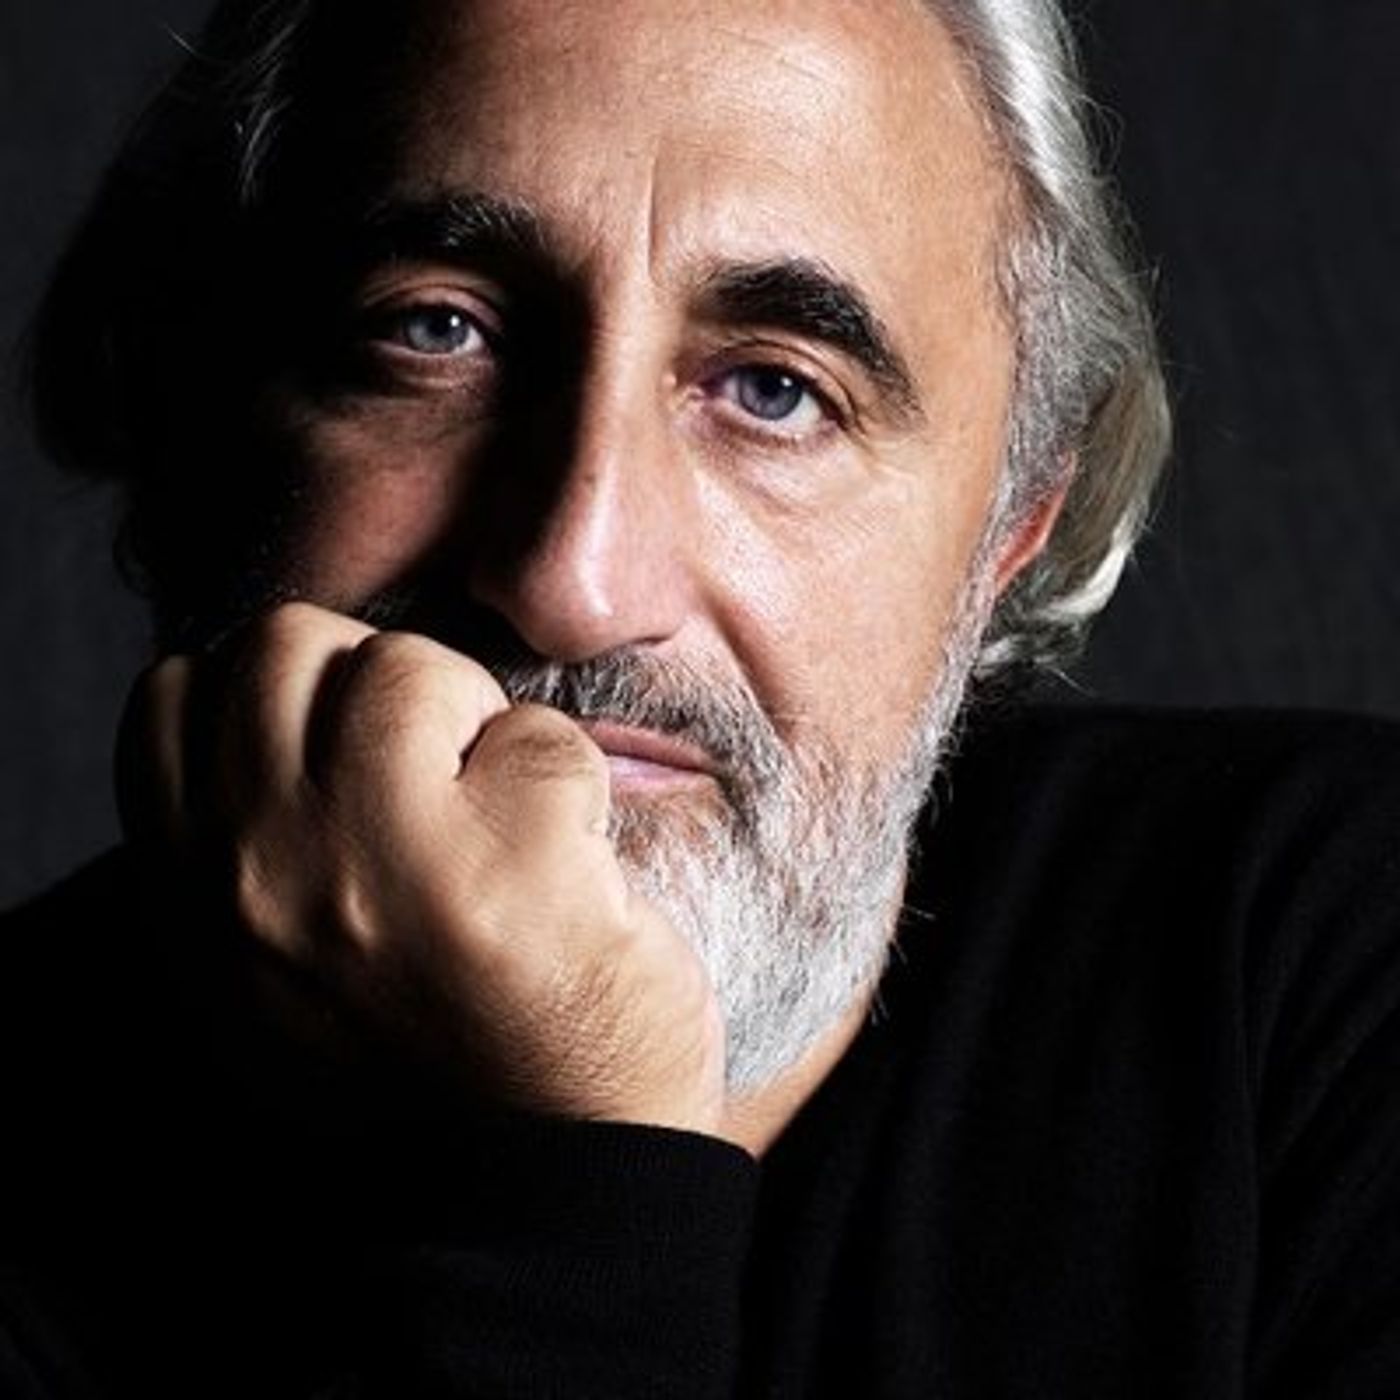 THE PARASITIC MIND: HOW INFECTIOUS IDEAS ARE KILLING COMMON SENSE: (SPECIAL GUEST DR. GAD SAAD)